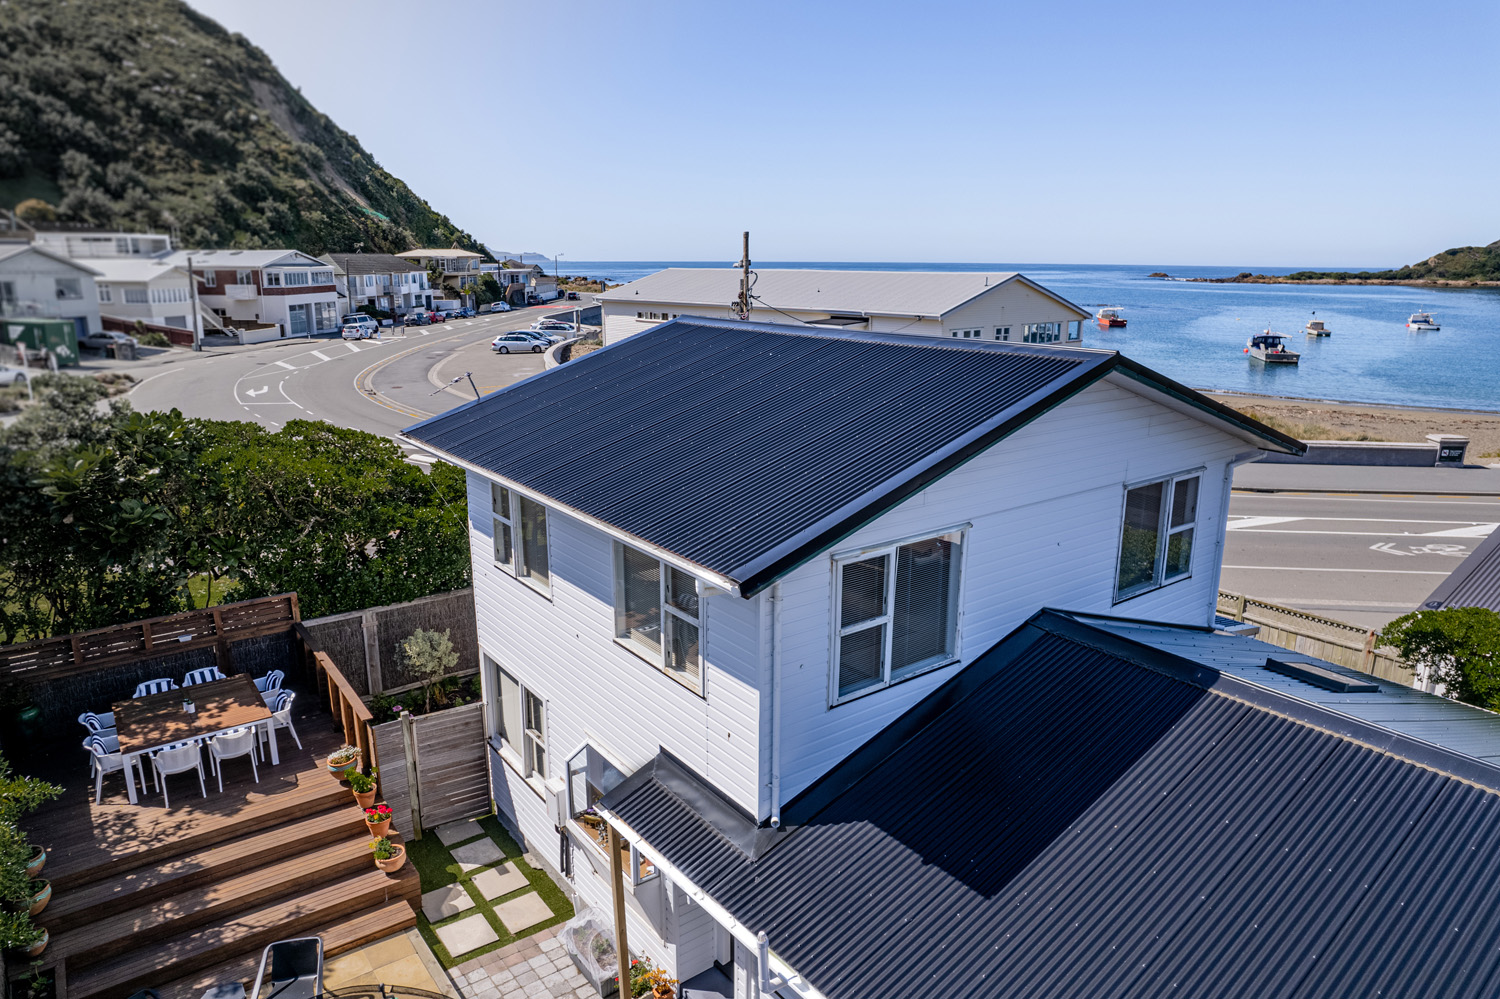 Low aerial shot of a roof in Island Bay